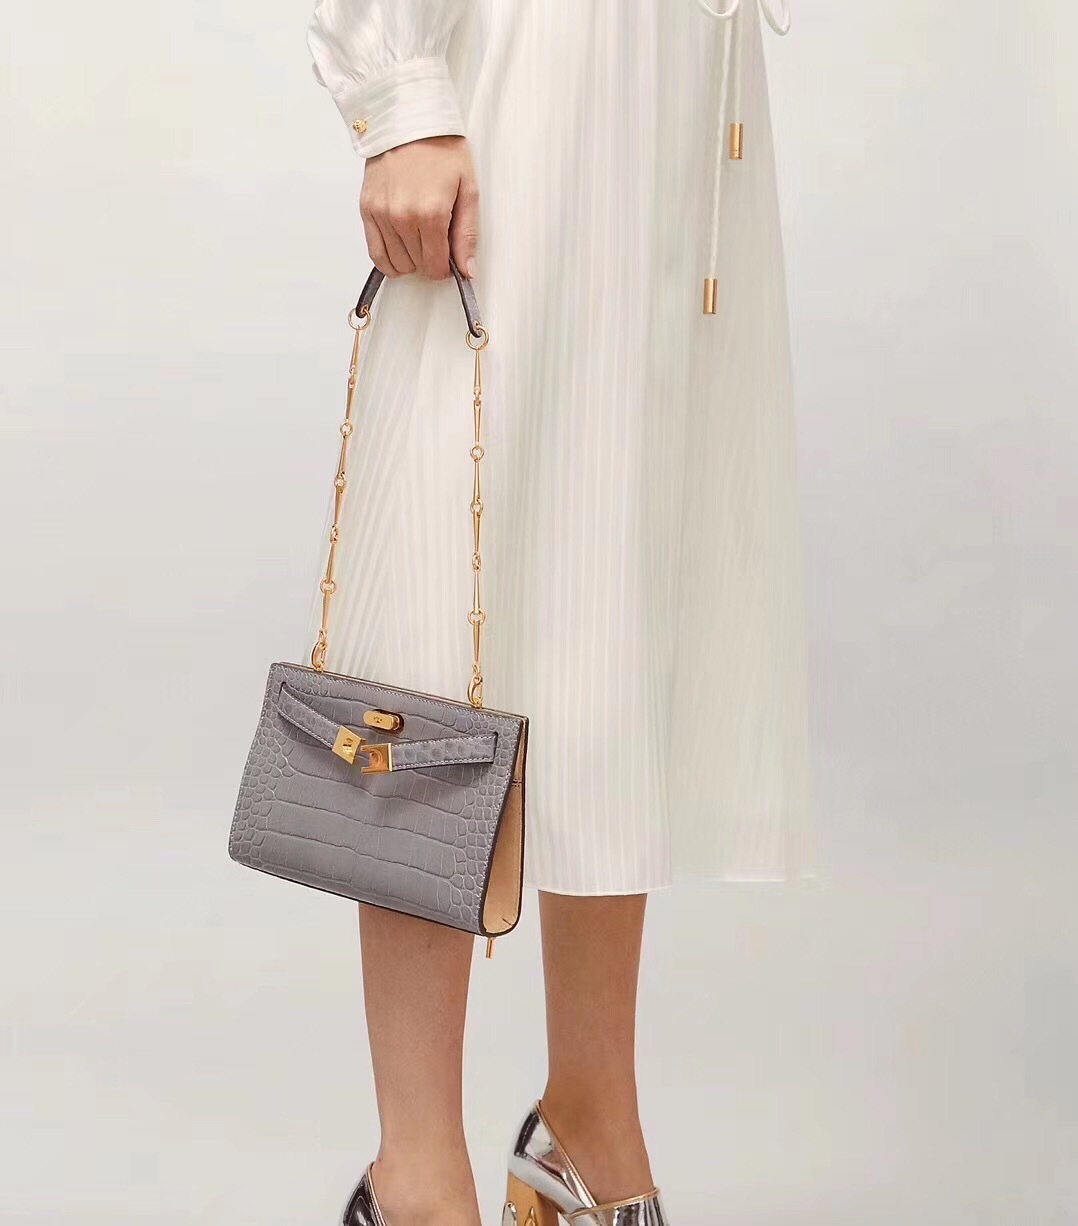 Tory Burch Lee Radziwill Shoulder Bag – Luxe Paradise